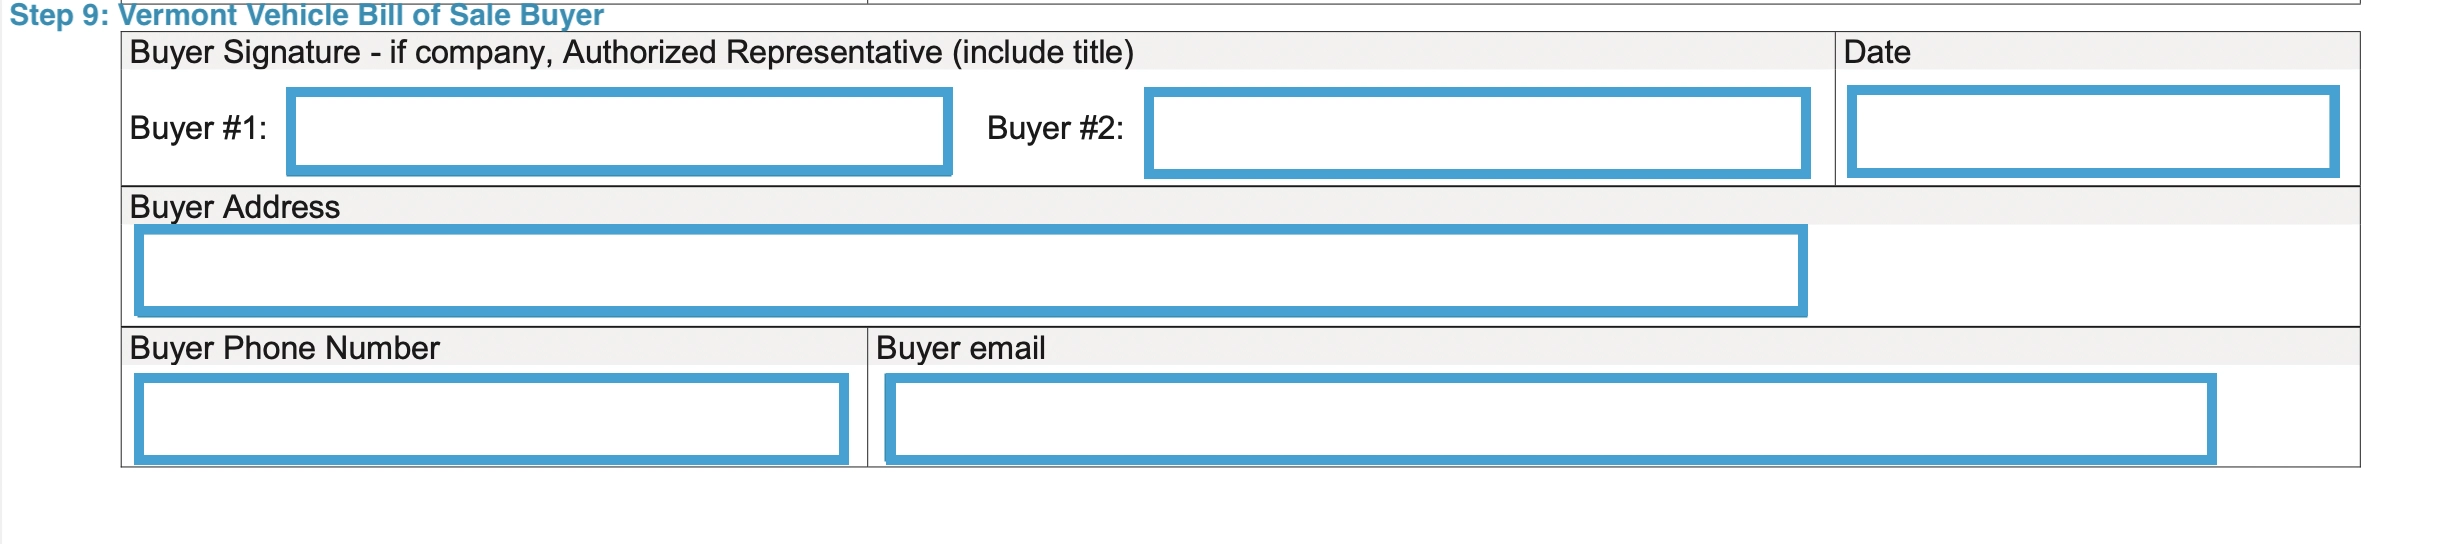 Step 9 to filling out a vermont vehicle bill of sale template buyer